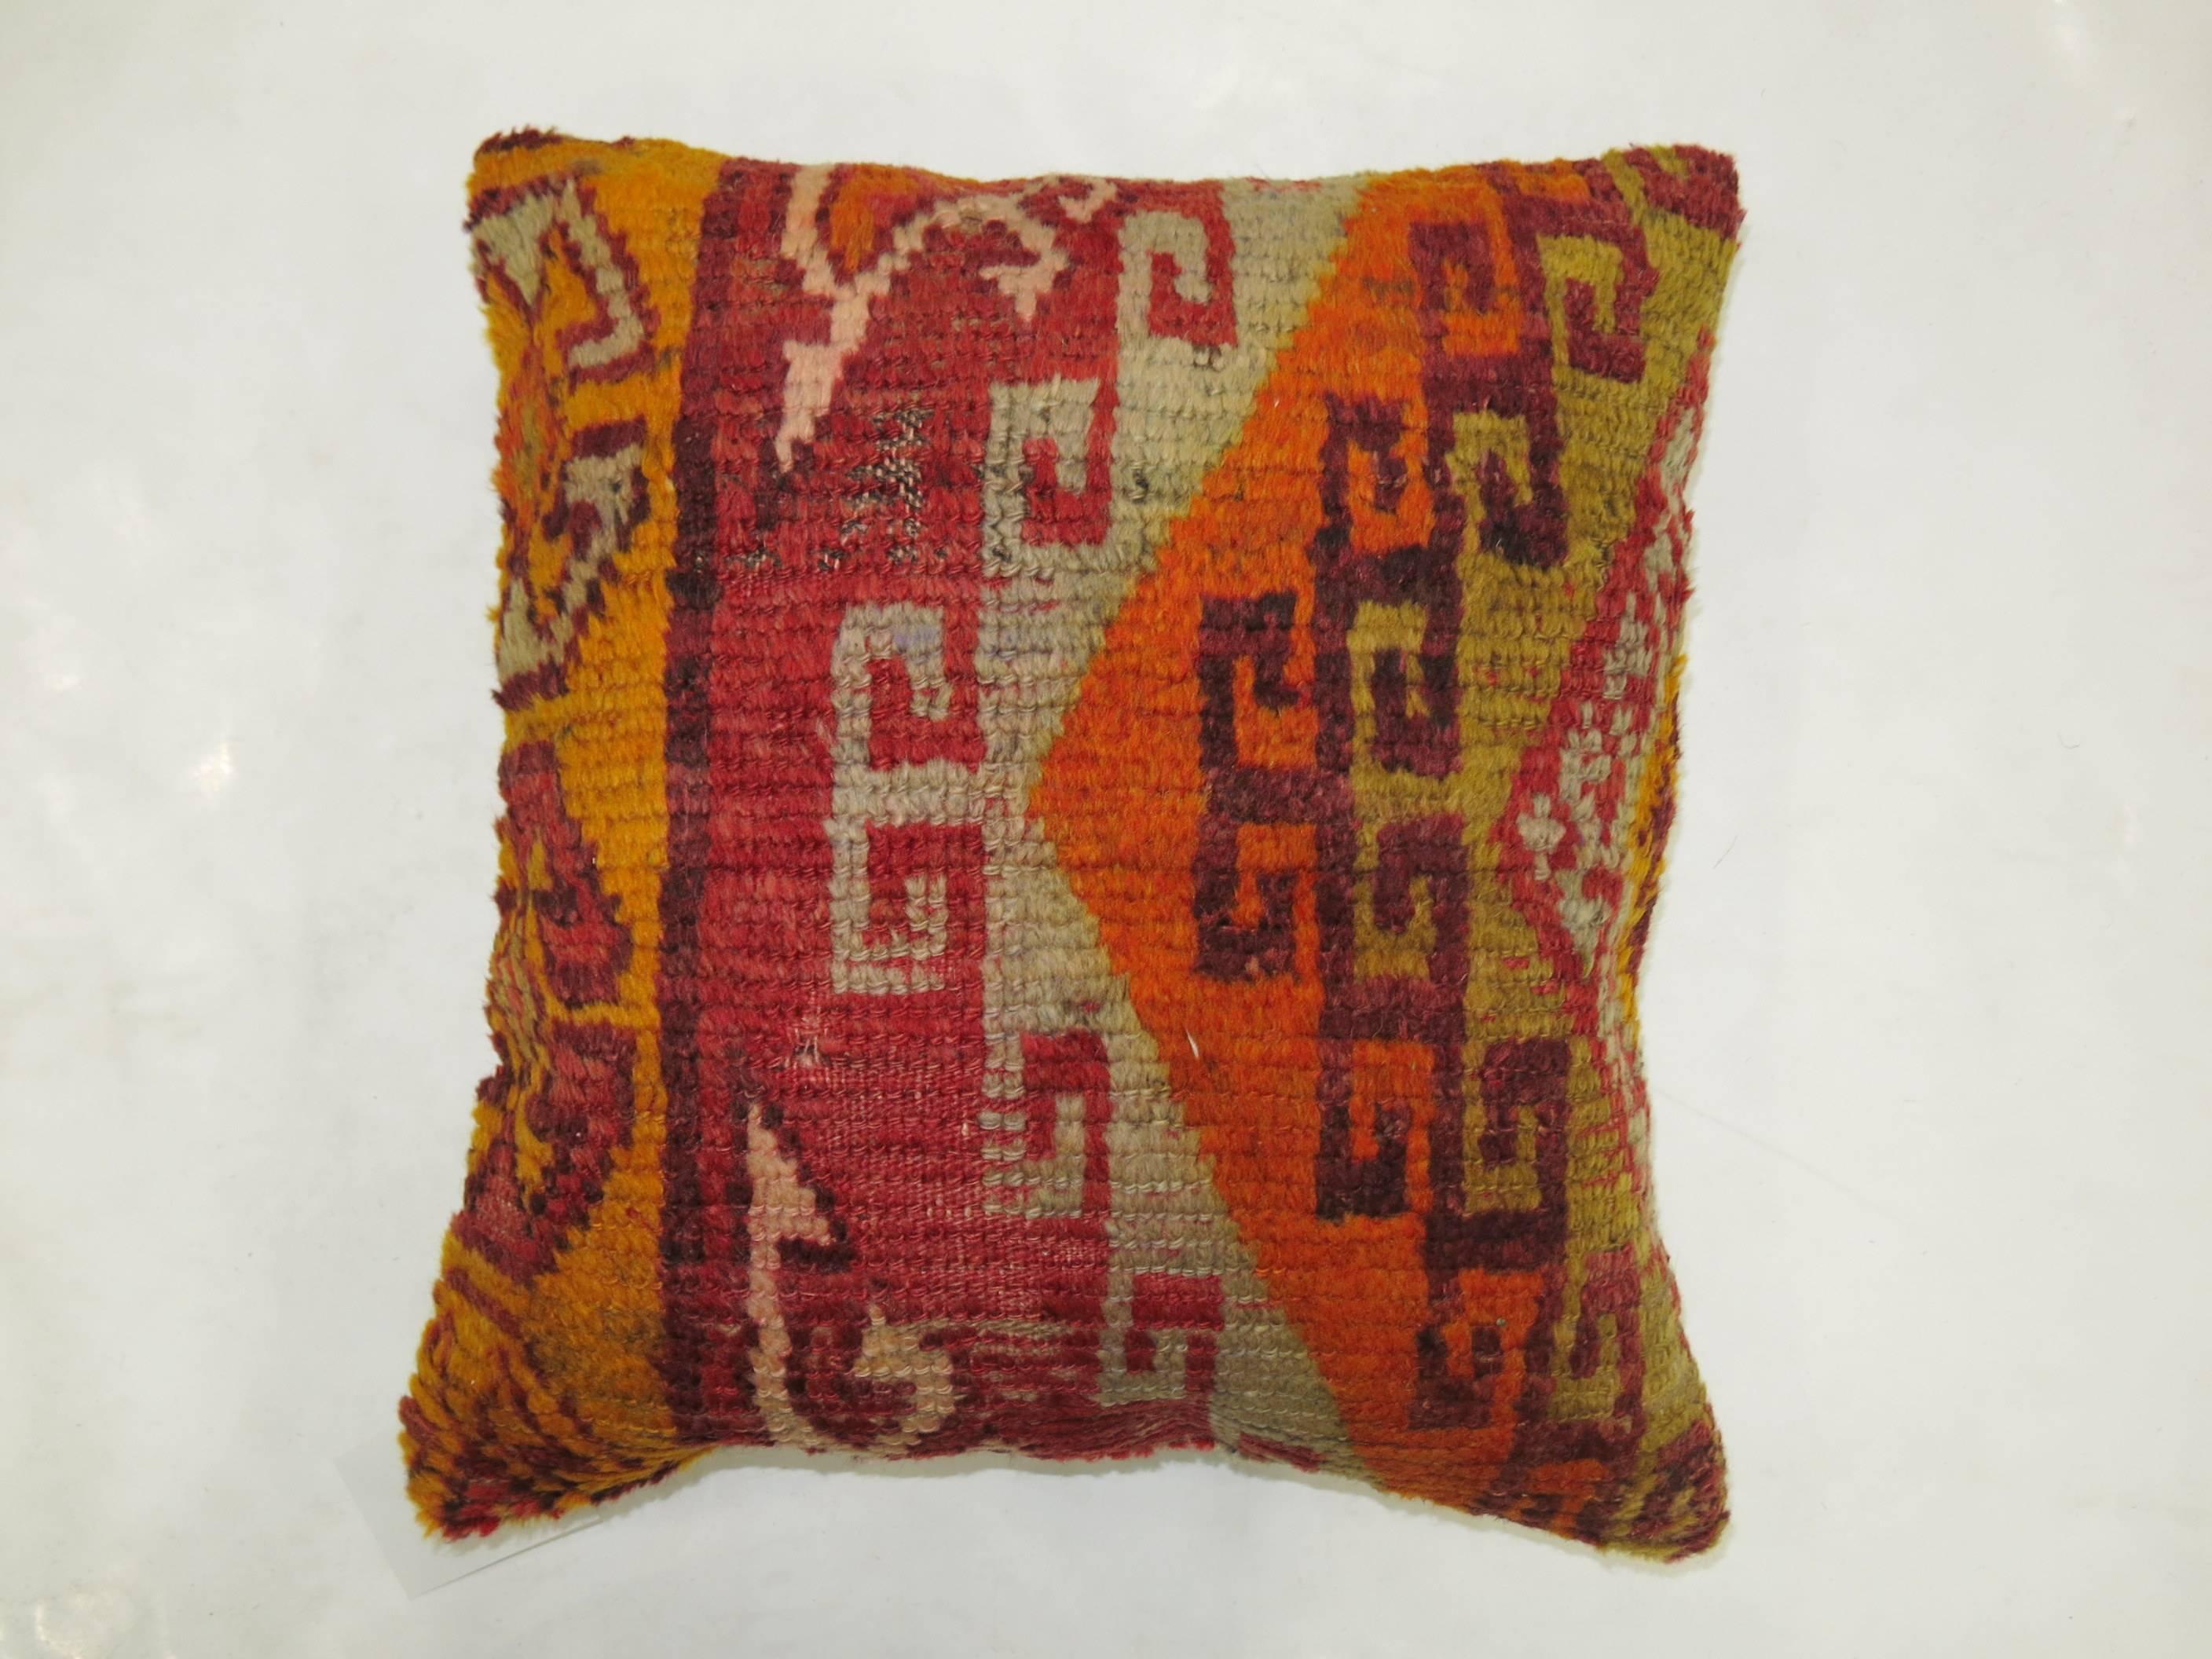 Pair of bright Turkish rug pillows measuring 16'' x 16'' respectively.